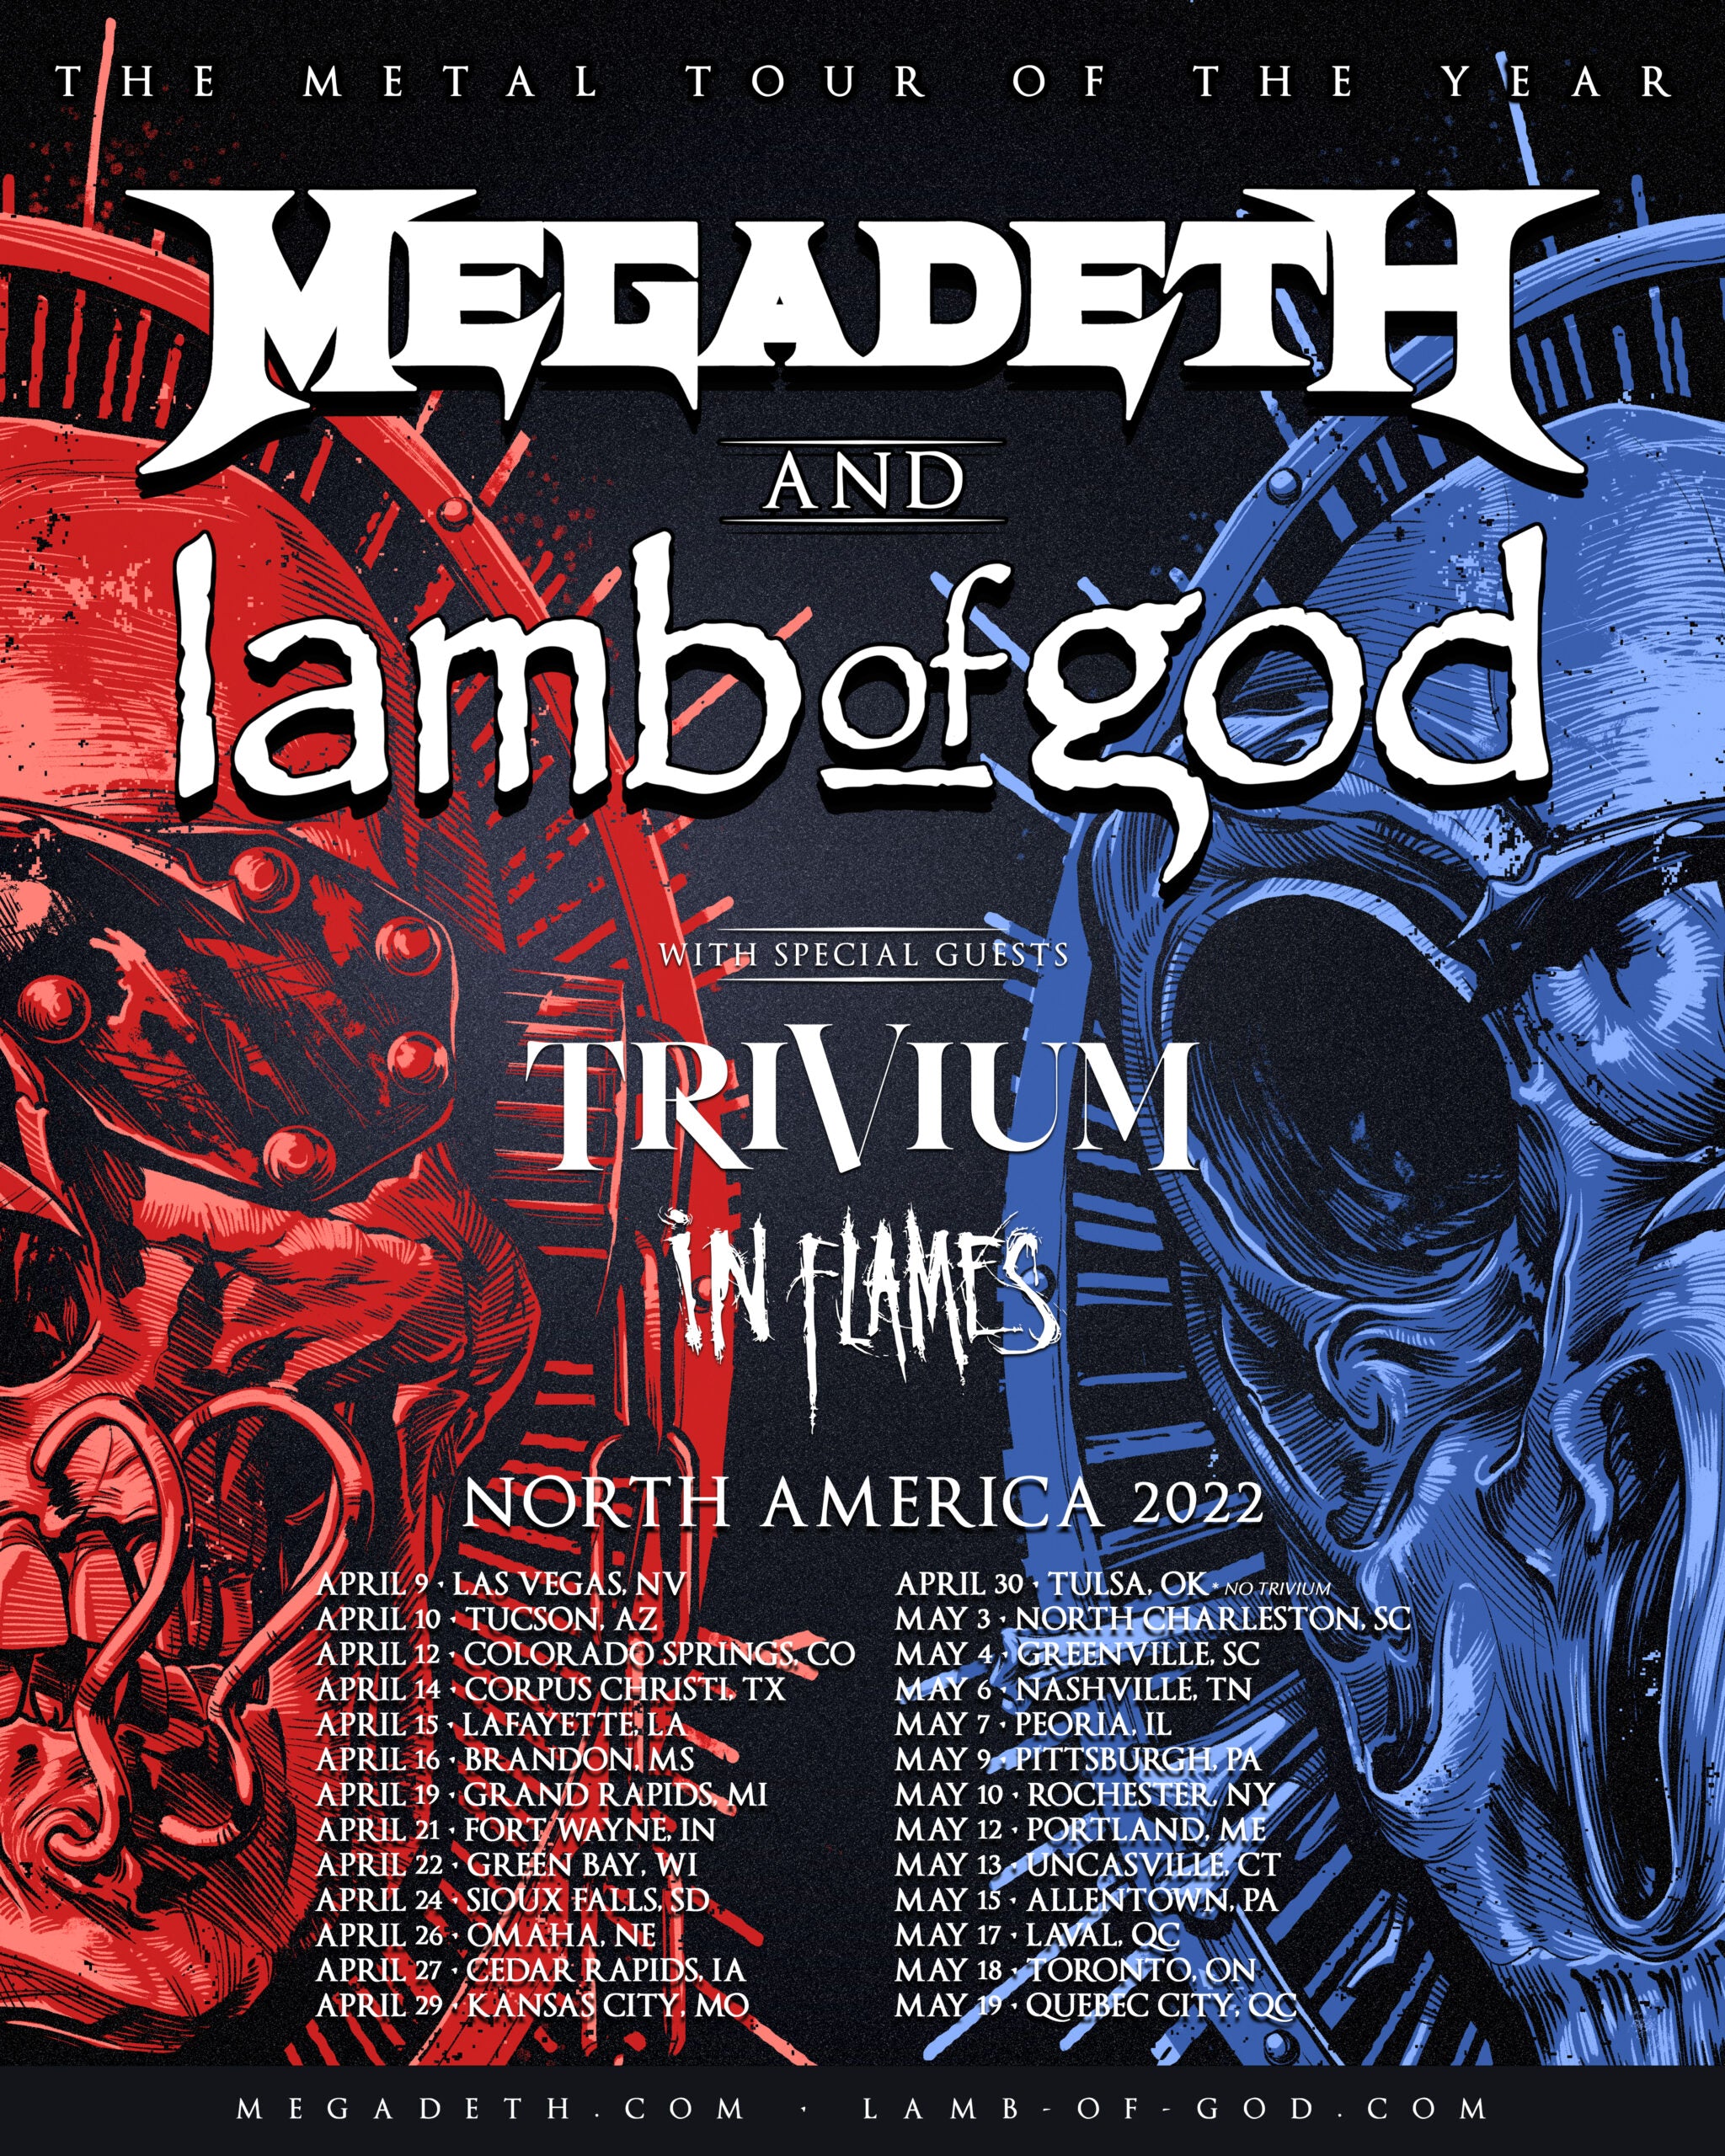 Megadeth Canadian Dates Added to Metal Tour of the Year!